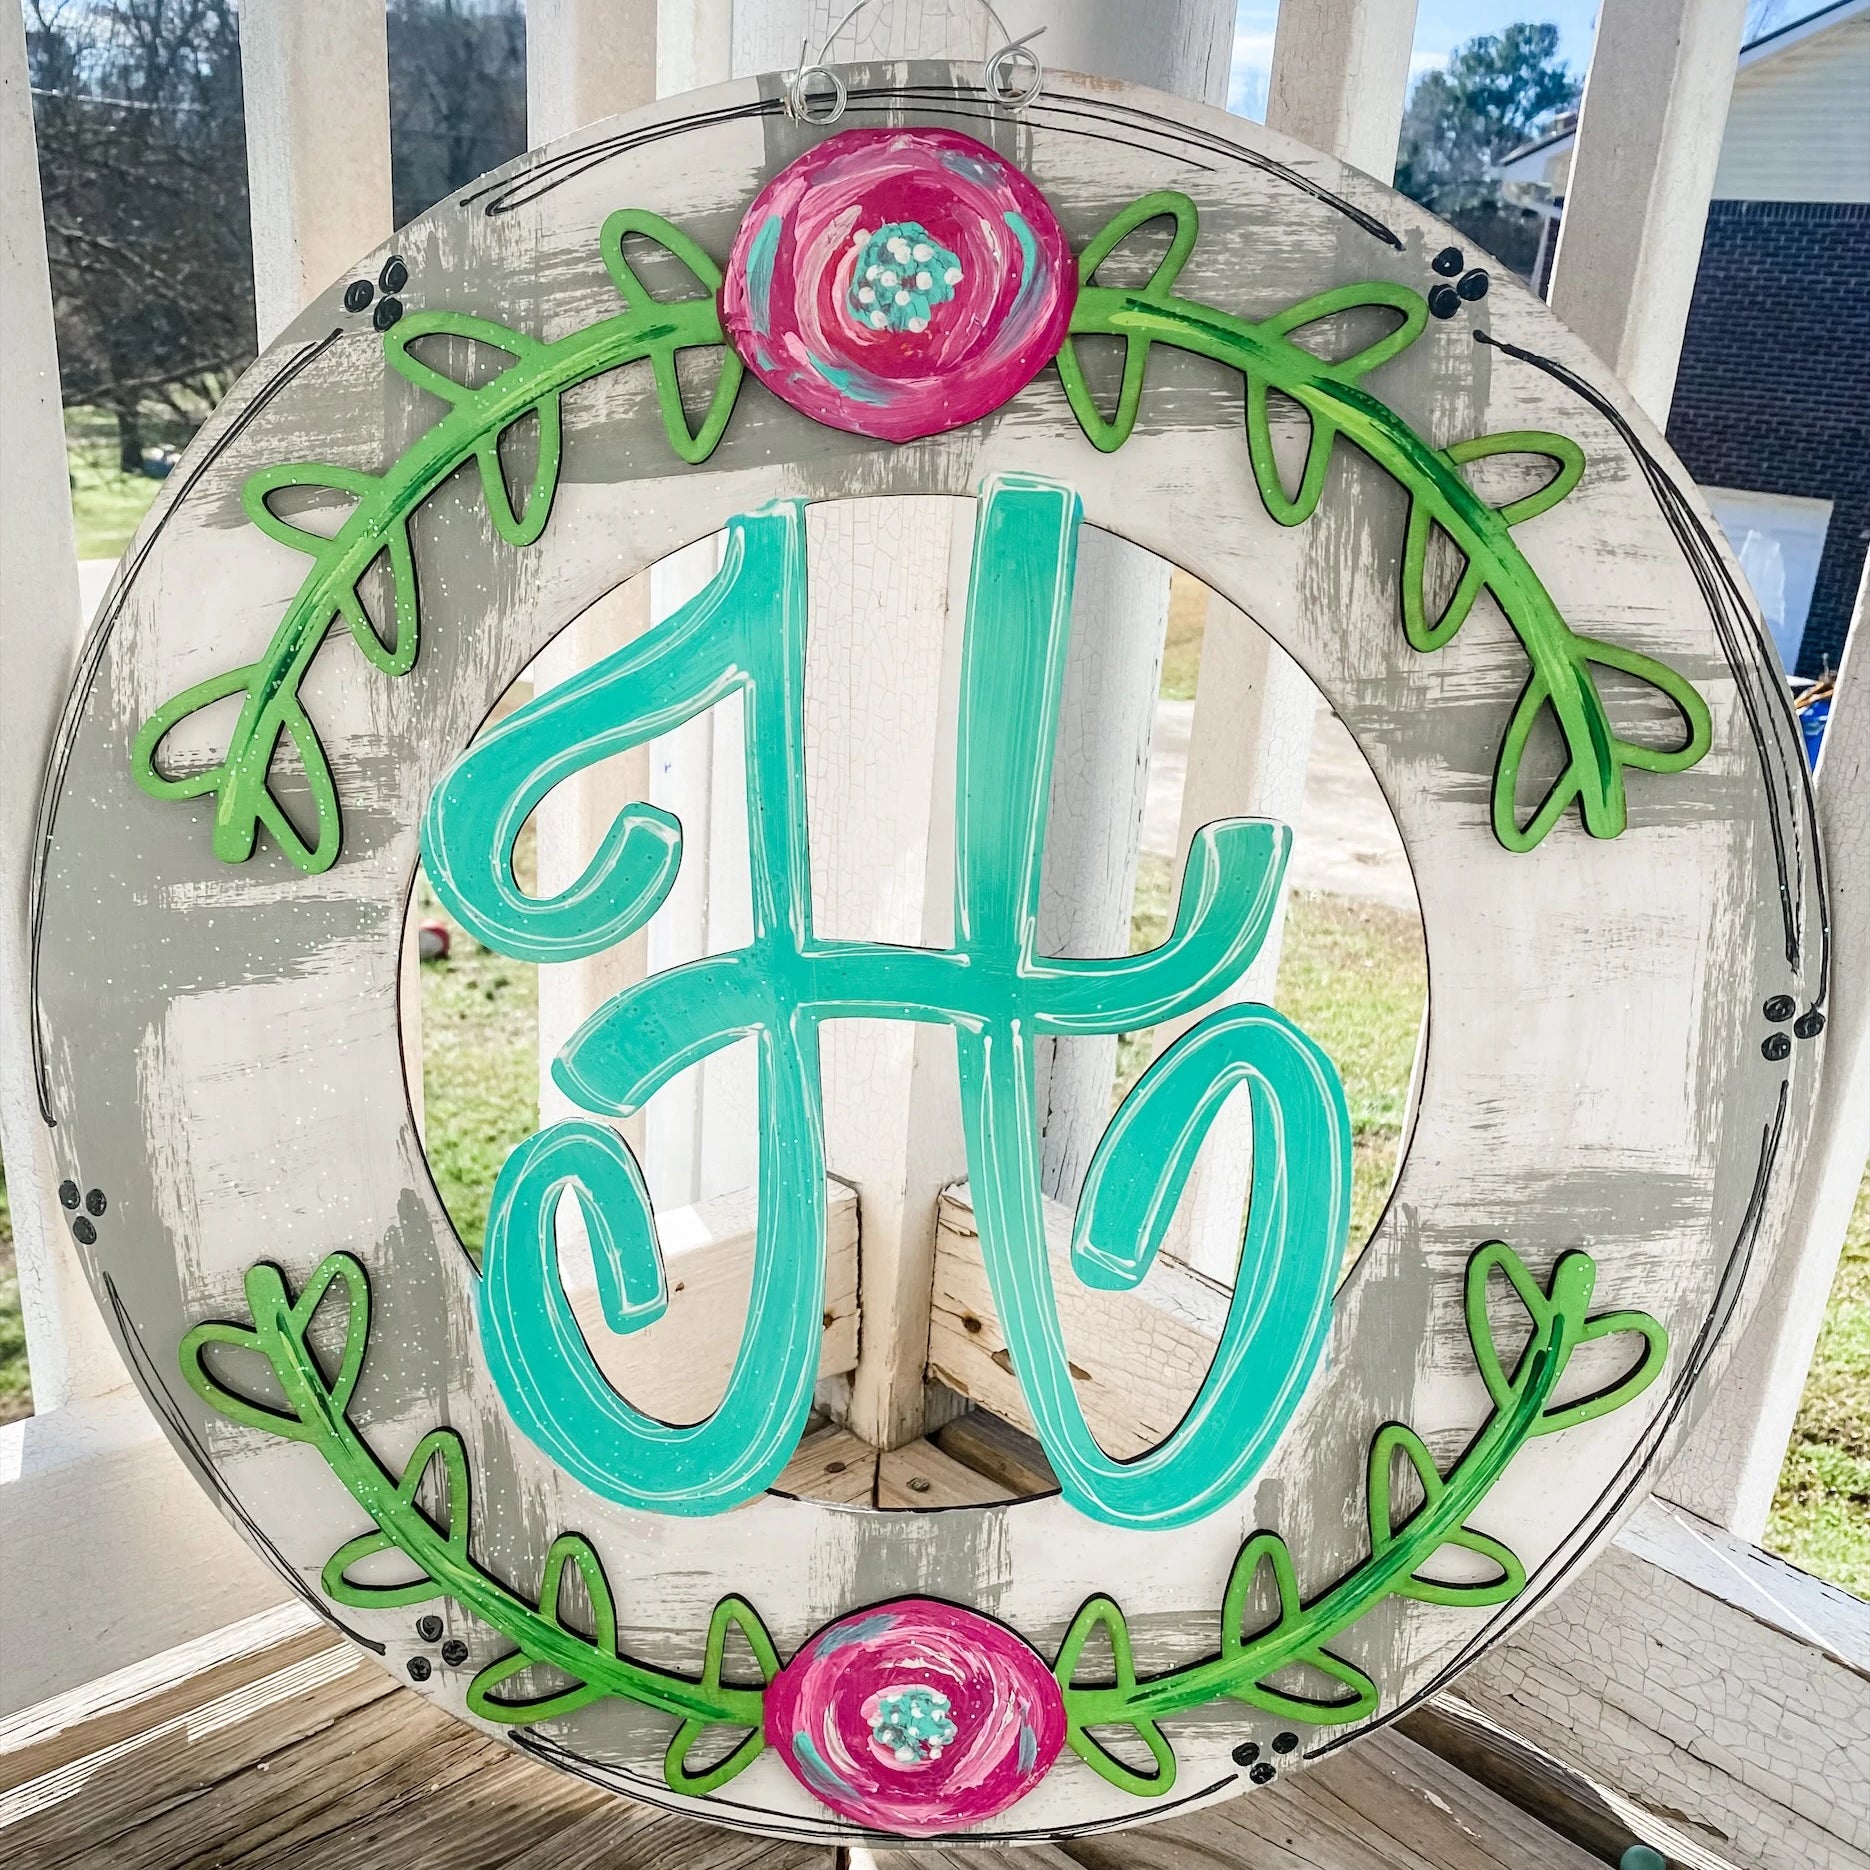 Circular spring-themed door hanger with family initial and flowers and vines around the edges